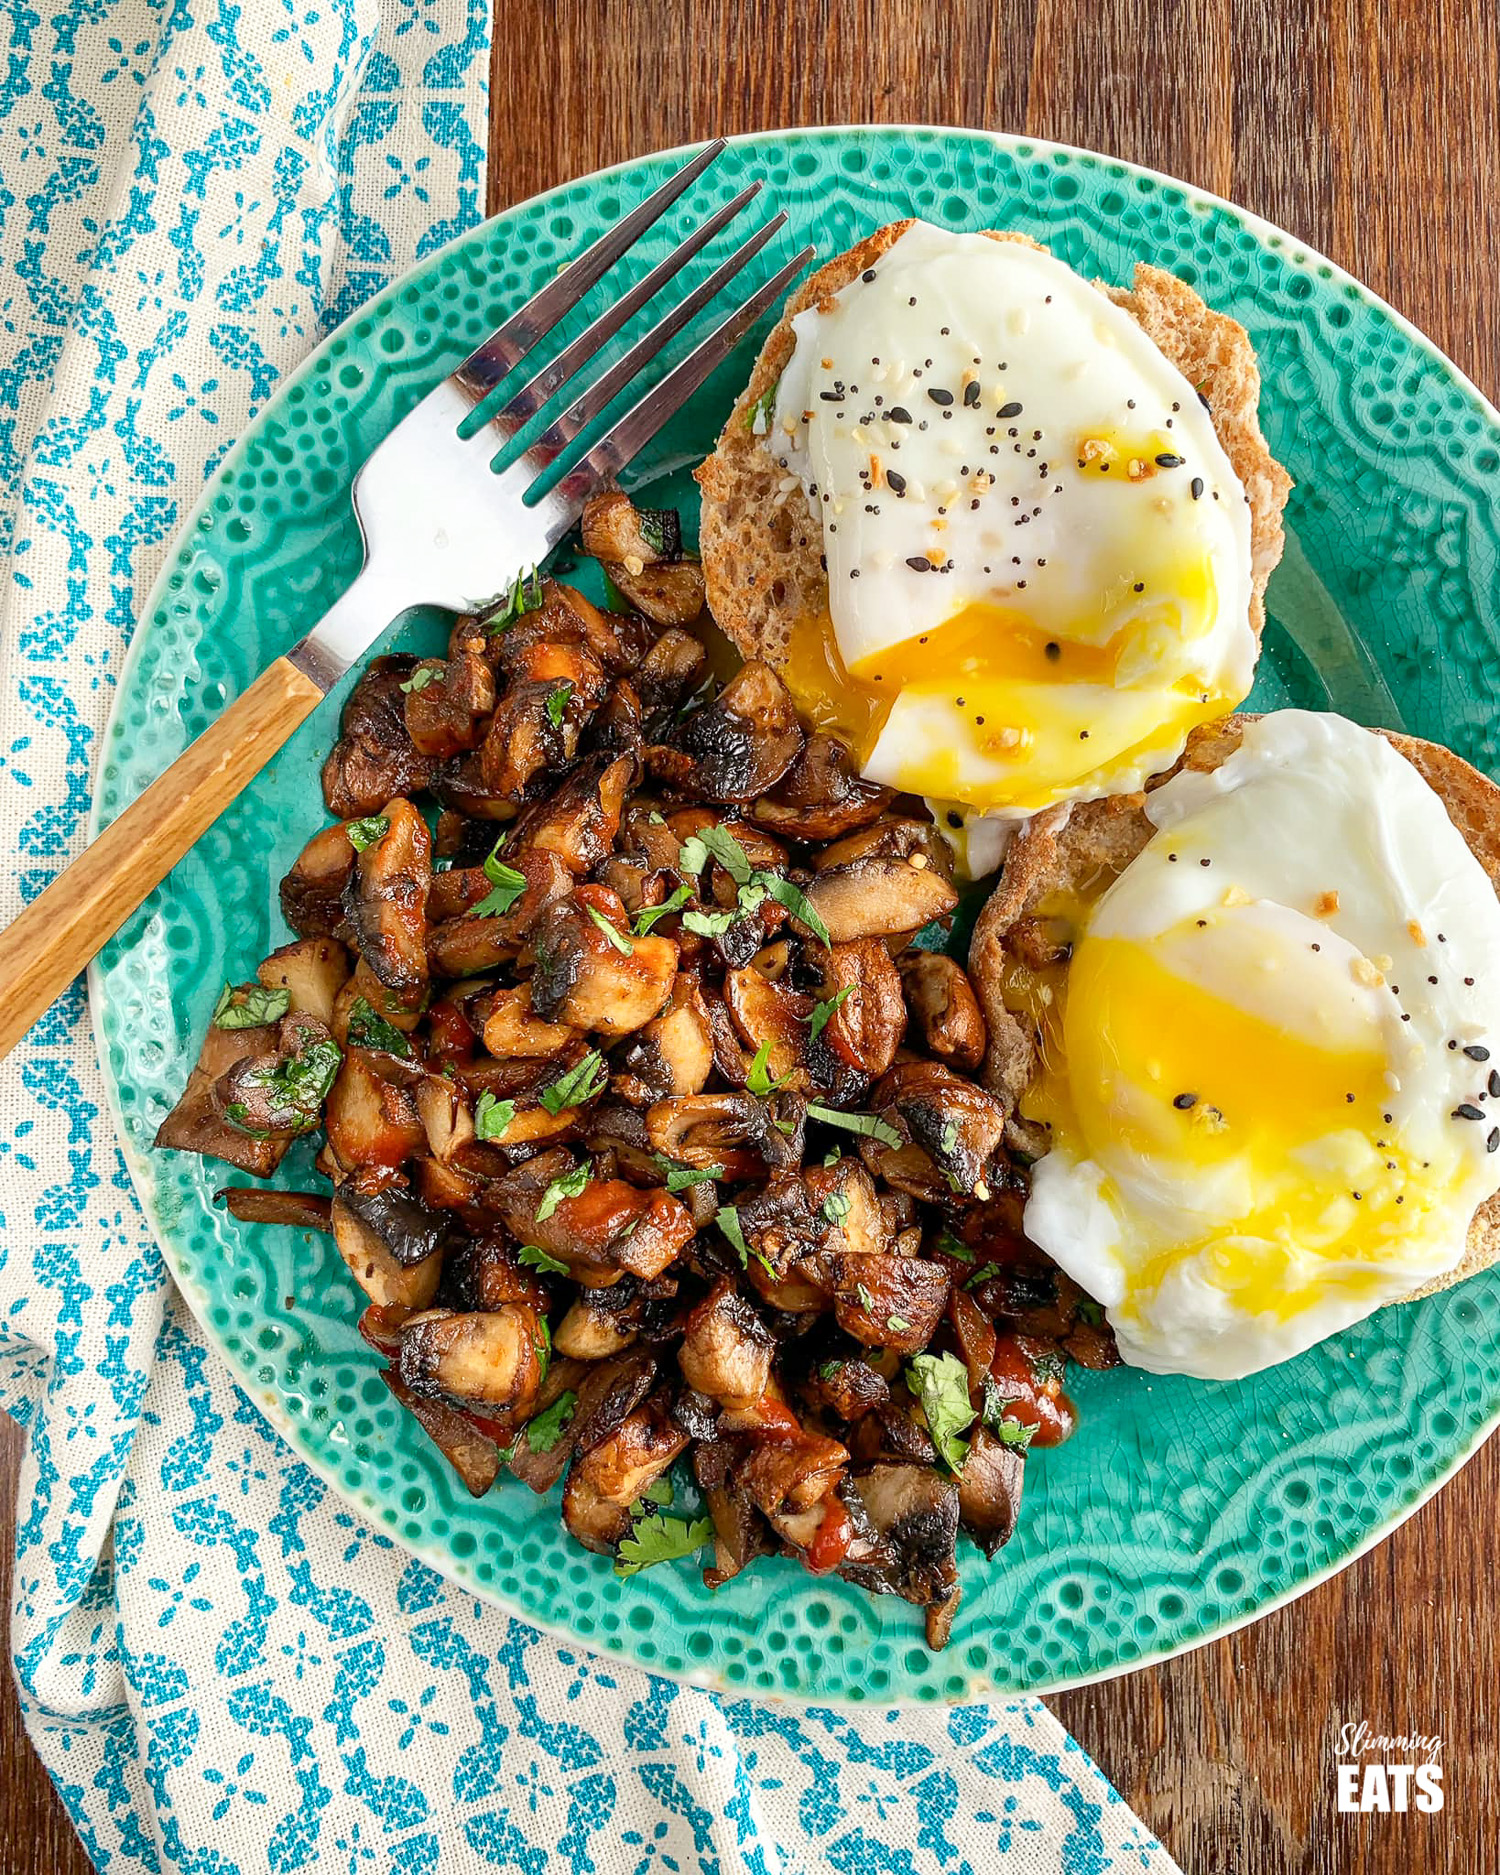 toasted wholewheat muffin topped with poached eggs on the side or sriracha style mushrooms on a teal plate with fork to the left.